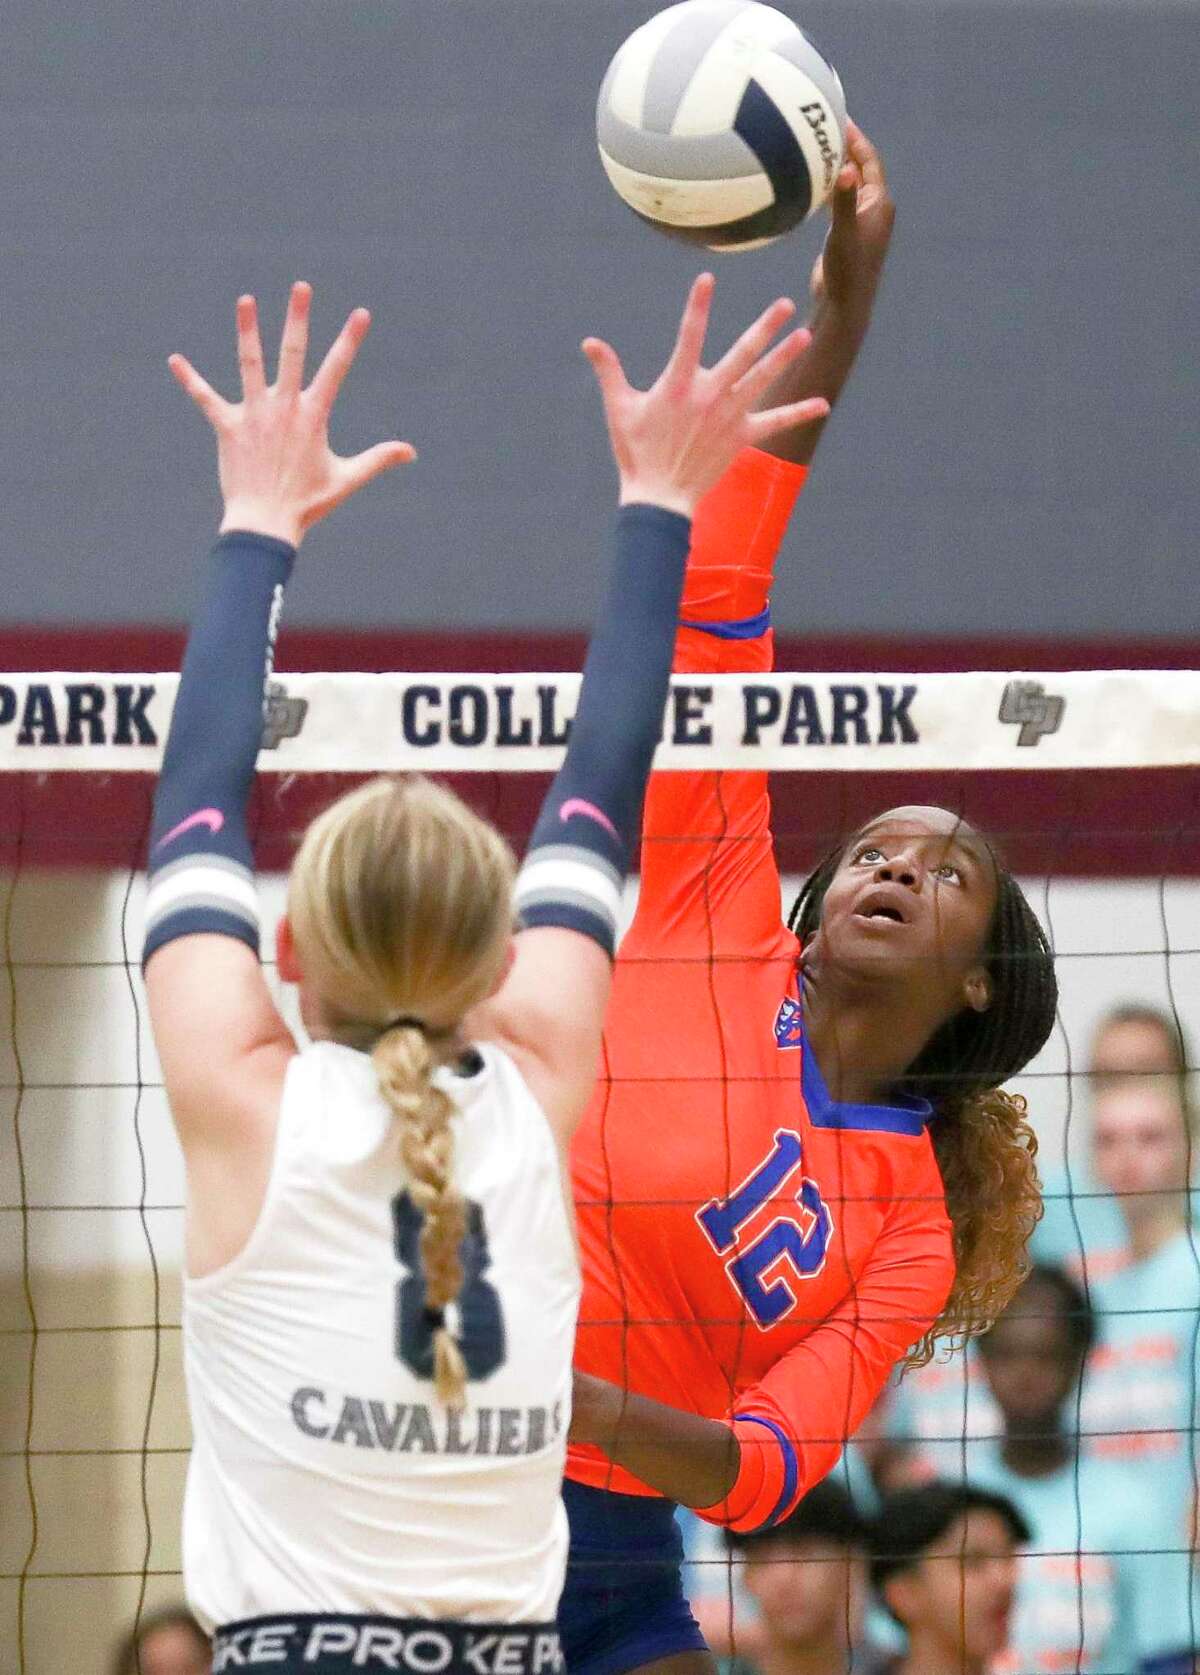 Grand Oaks' Samara Coleman (12) gets a shot past College Park's Cassidy Copeland (10) and Reese Ellen (8) in the first set of a District 13-6A high school volleyball match at College Park High School, Tuesday, Aug. 23, 2022, in The Woodlands.